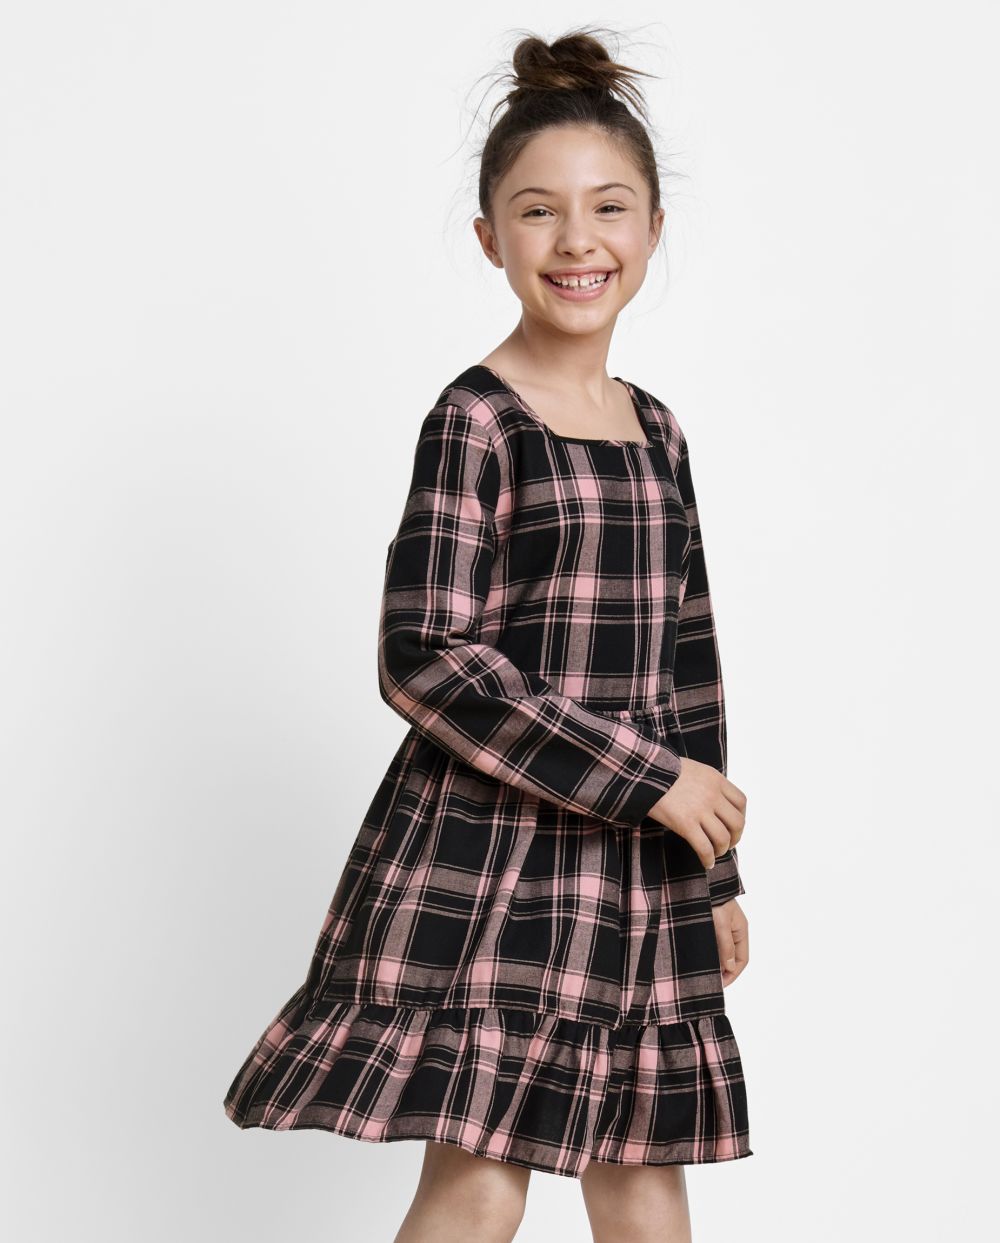 Girls Above the Knee Tiered Square Neck Long Sleeves Plaid Print Dress